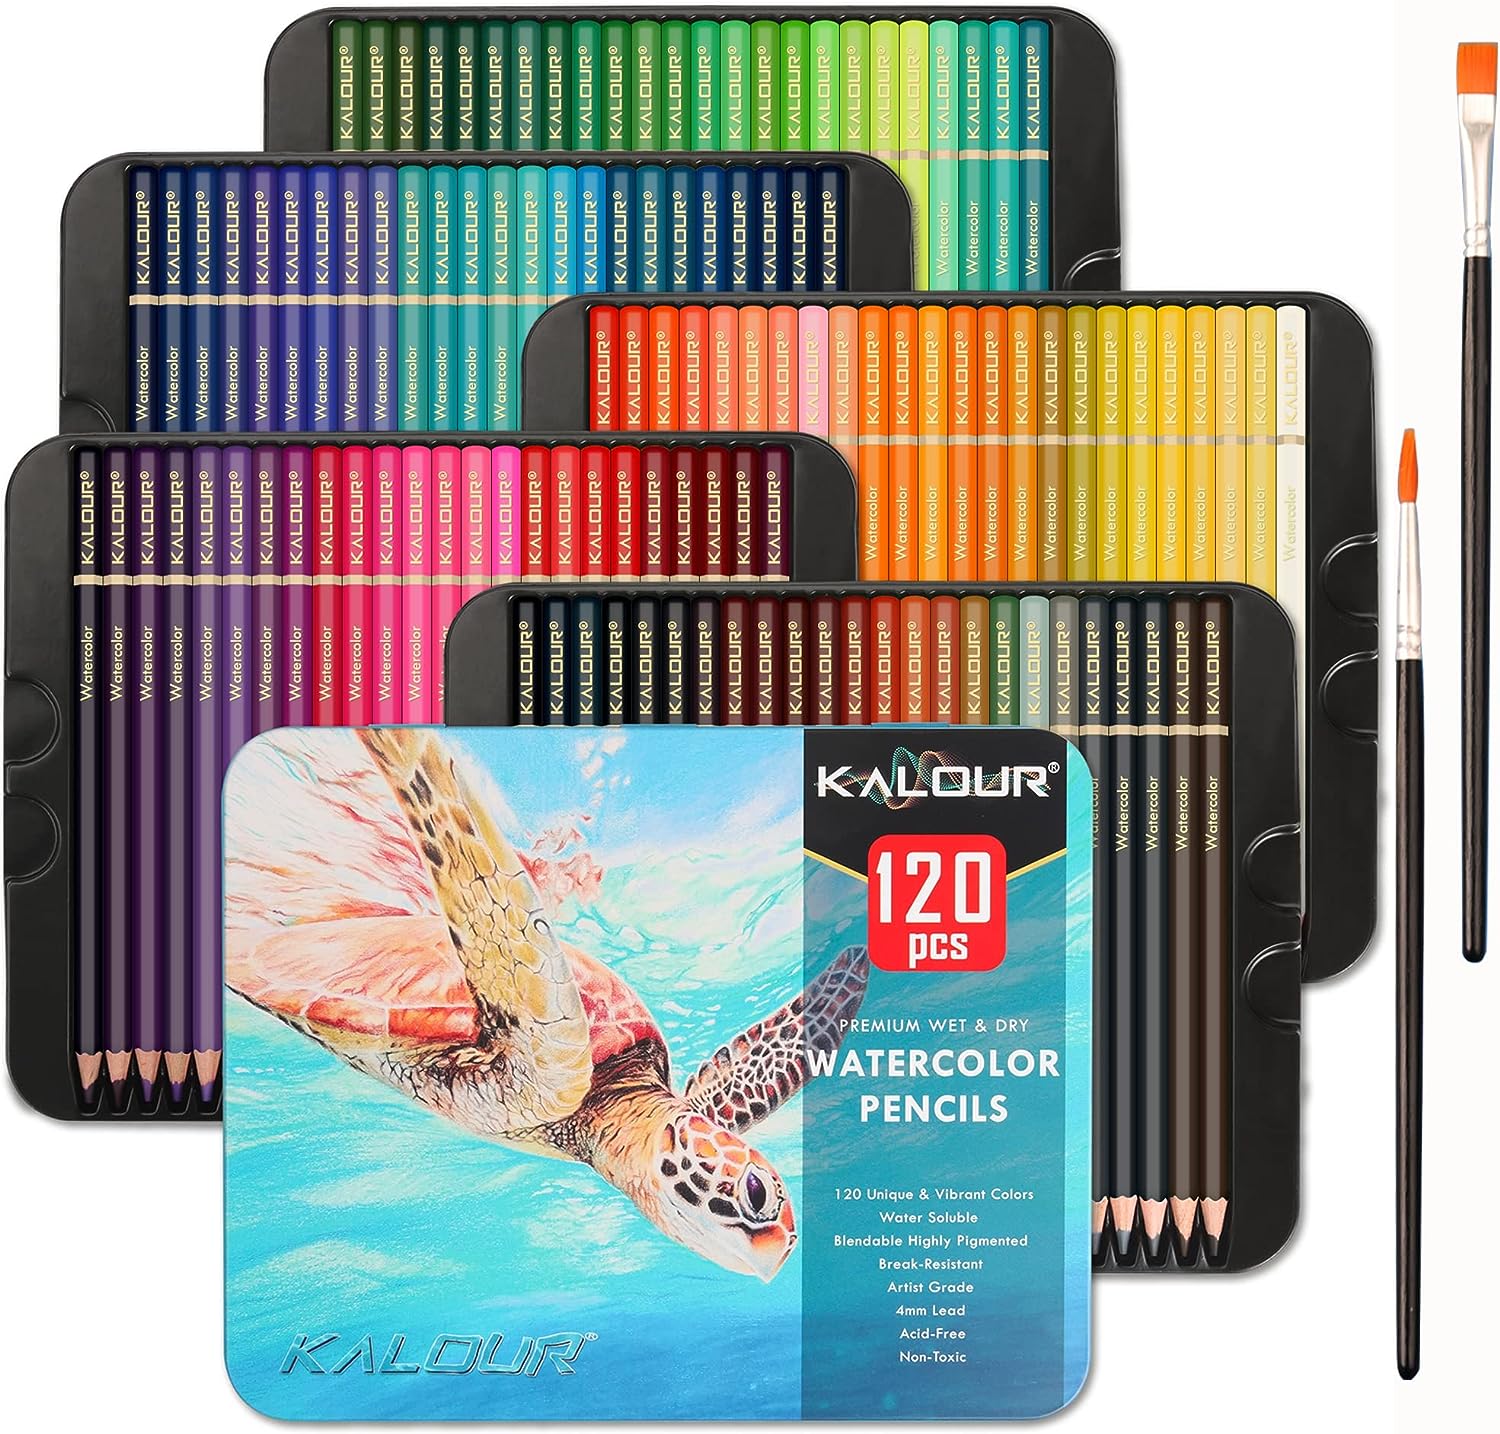 Wholesale Pencil Bags Professional Watercolor Set 123648 Coloured Pencils  Water Soluble Sketching With Brush Art Supplies For Artists 230706 From  Mu007, $11.71